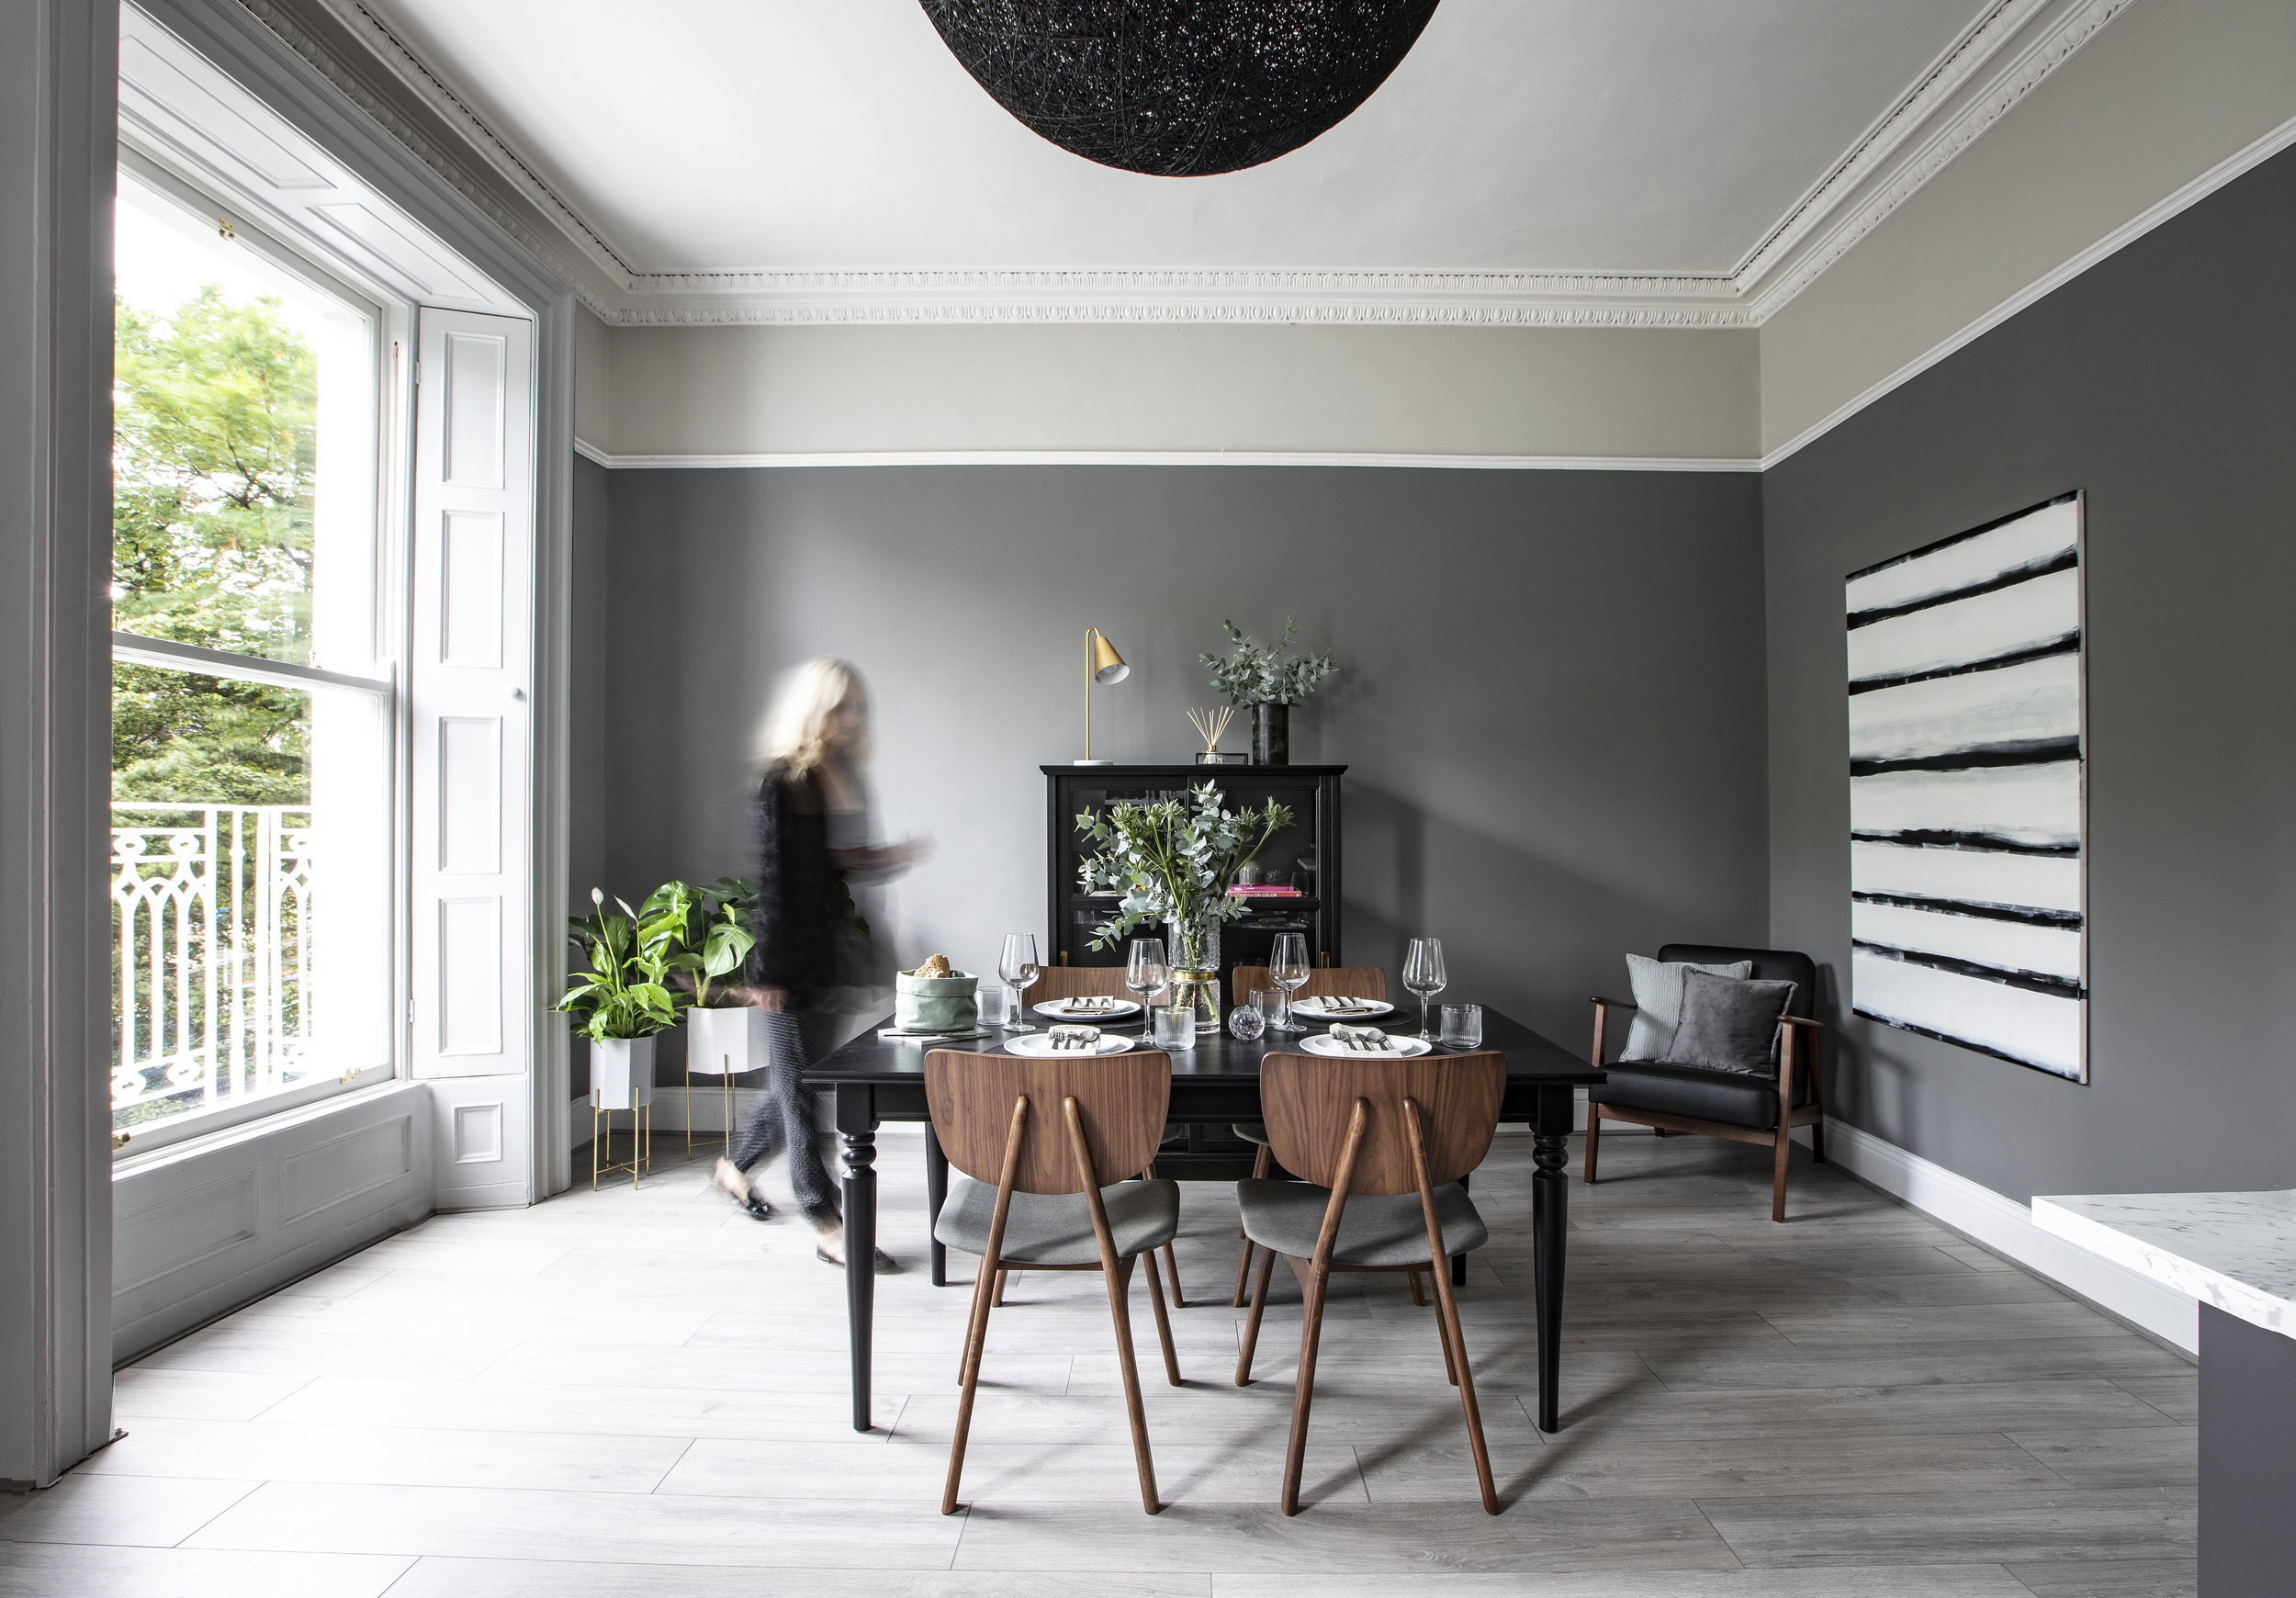 grey dining room French window shutters and ceiling border